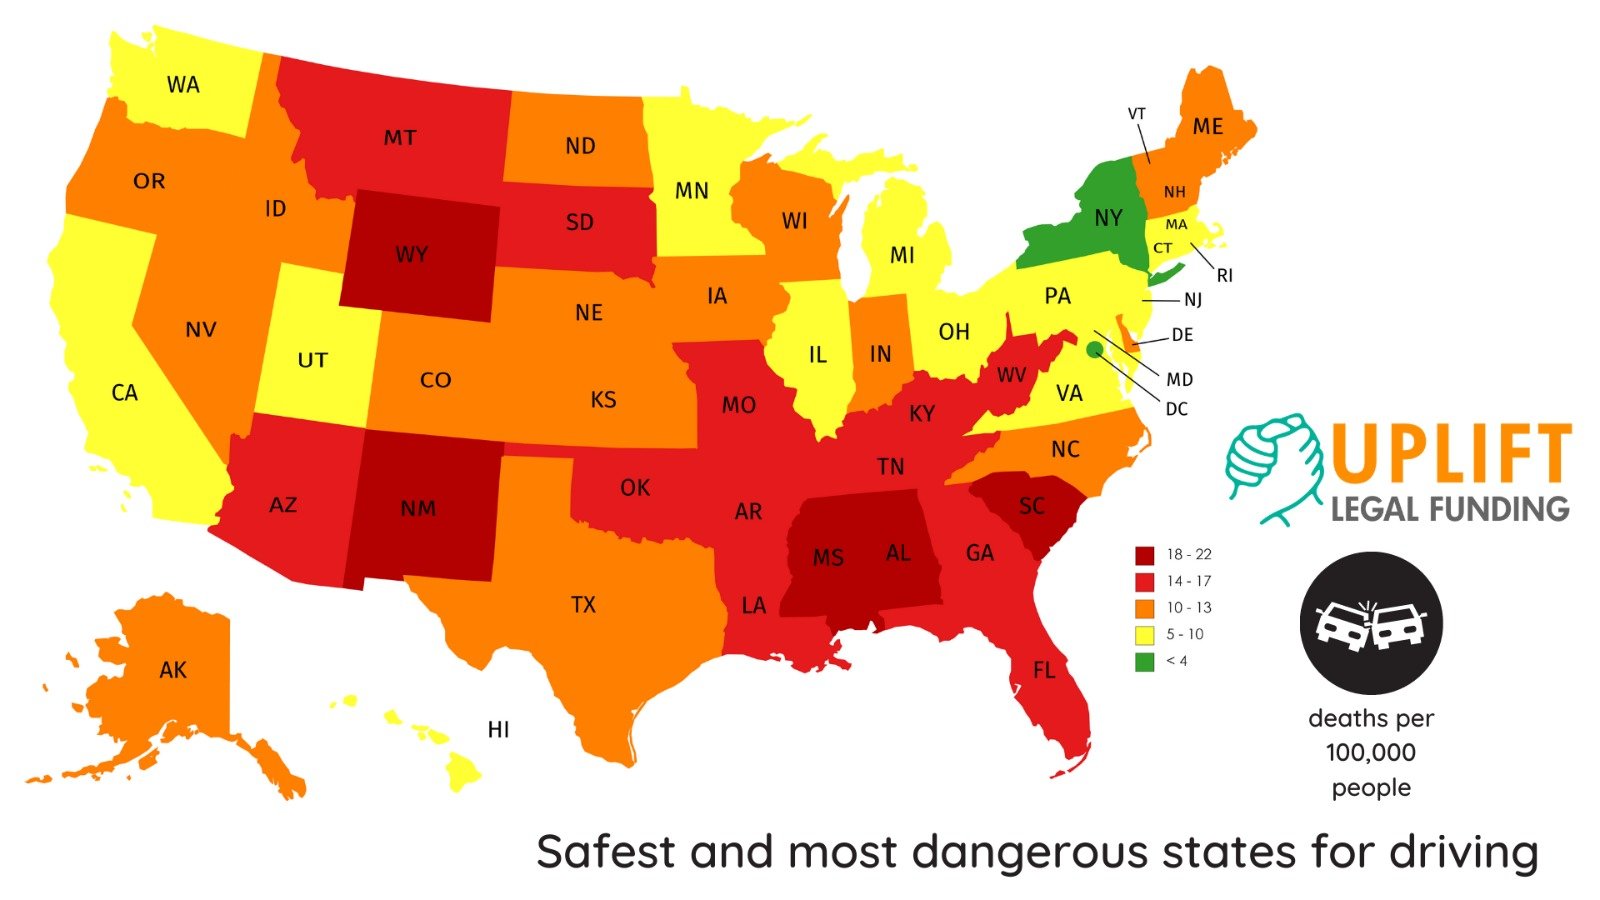 Most dangerous US states for driving, per capita